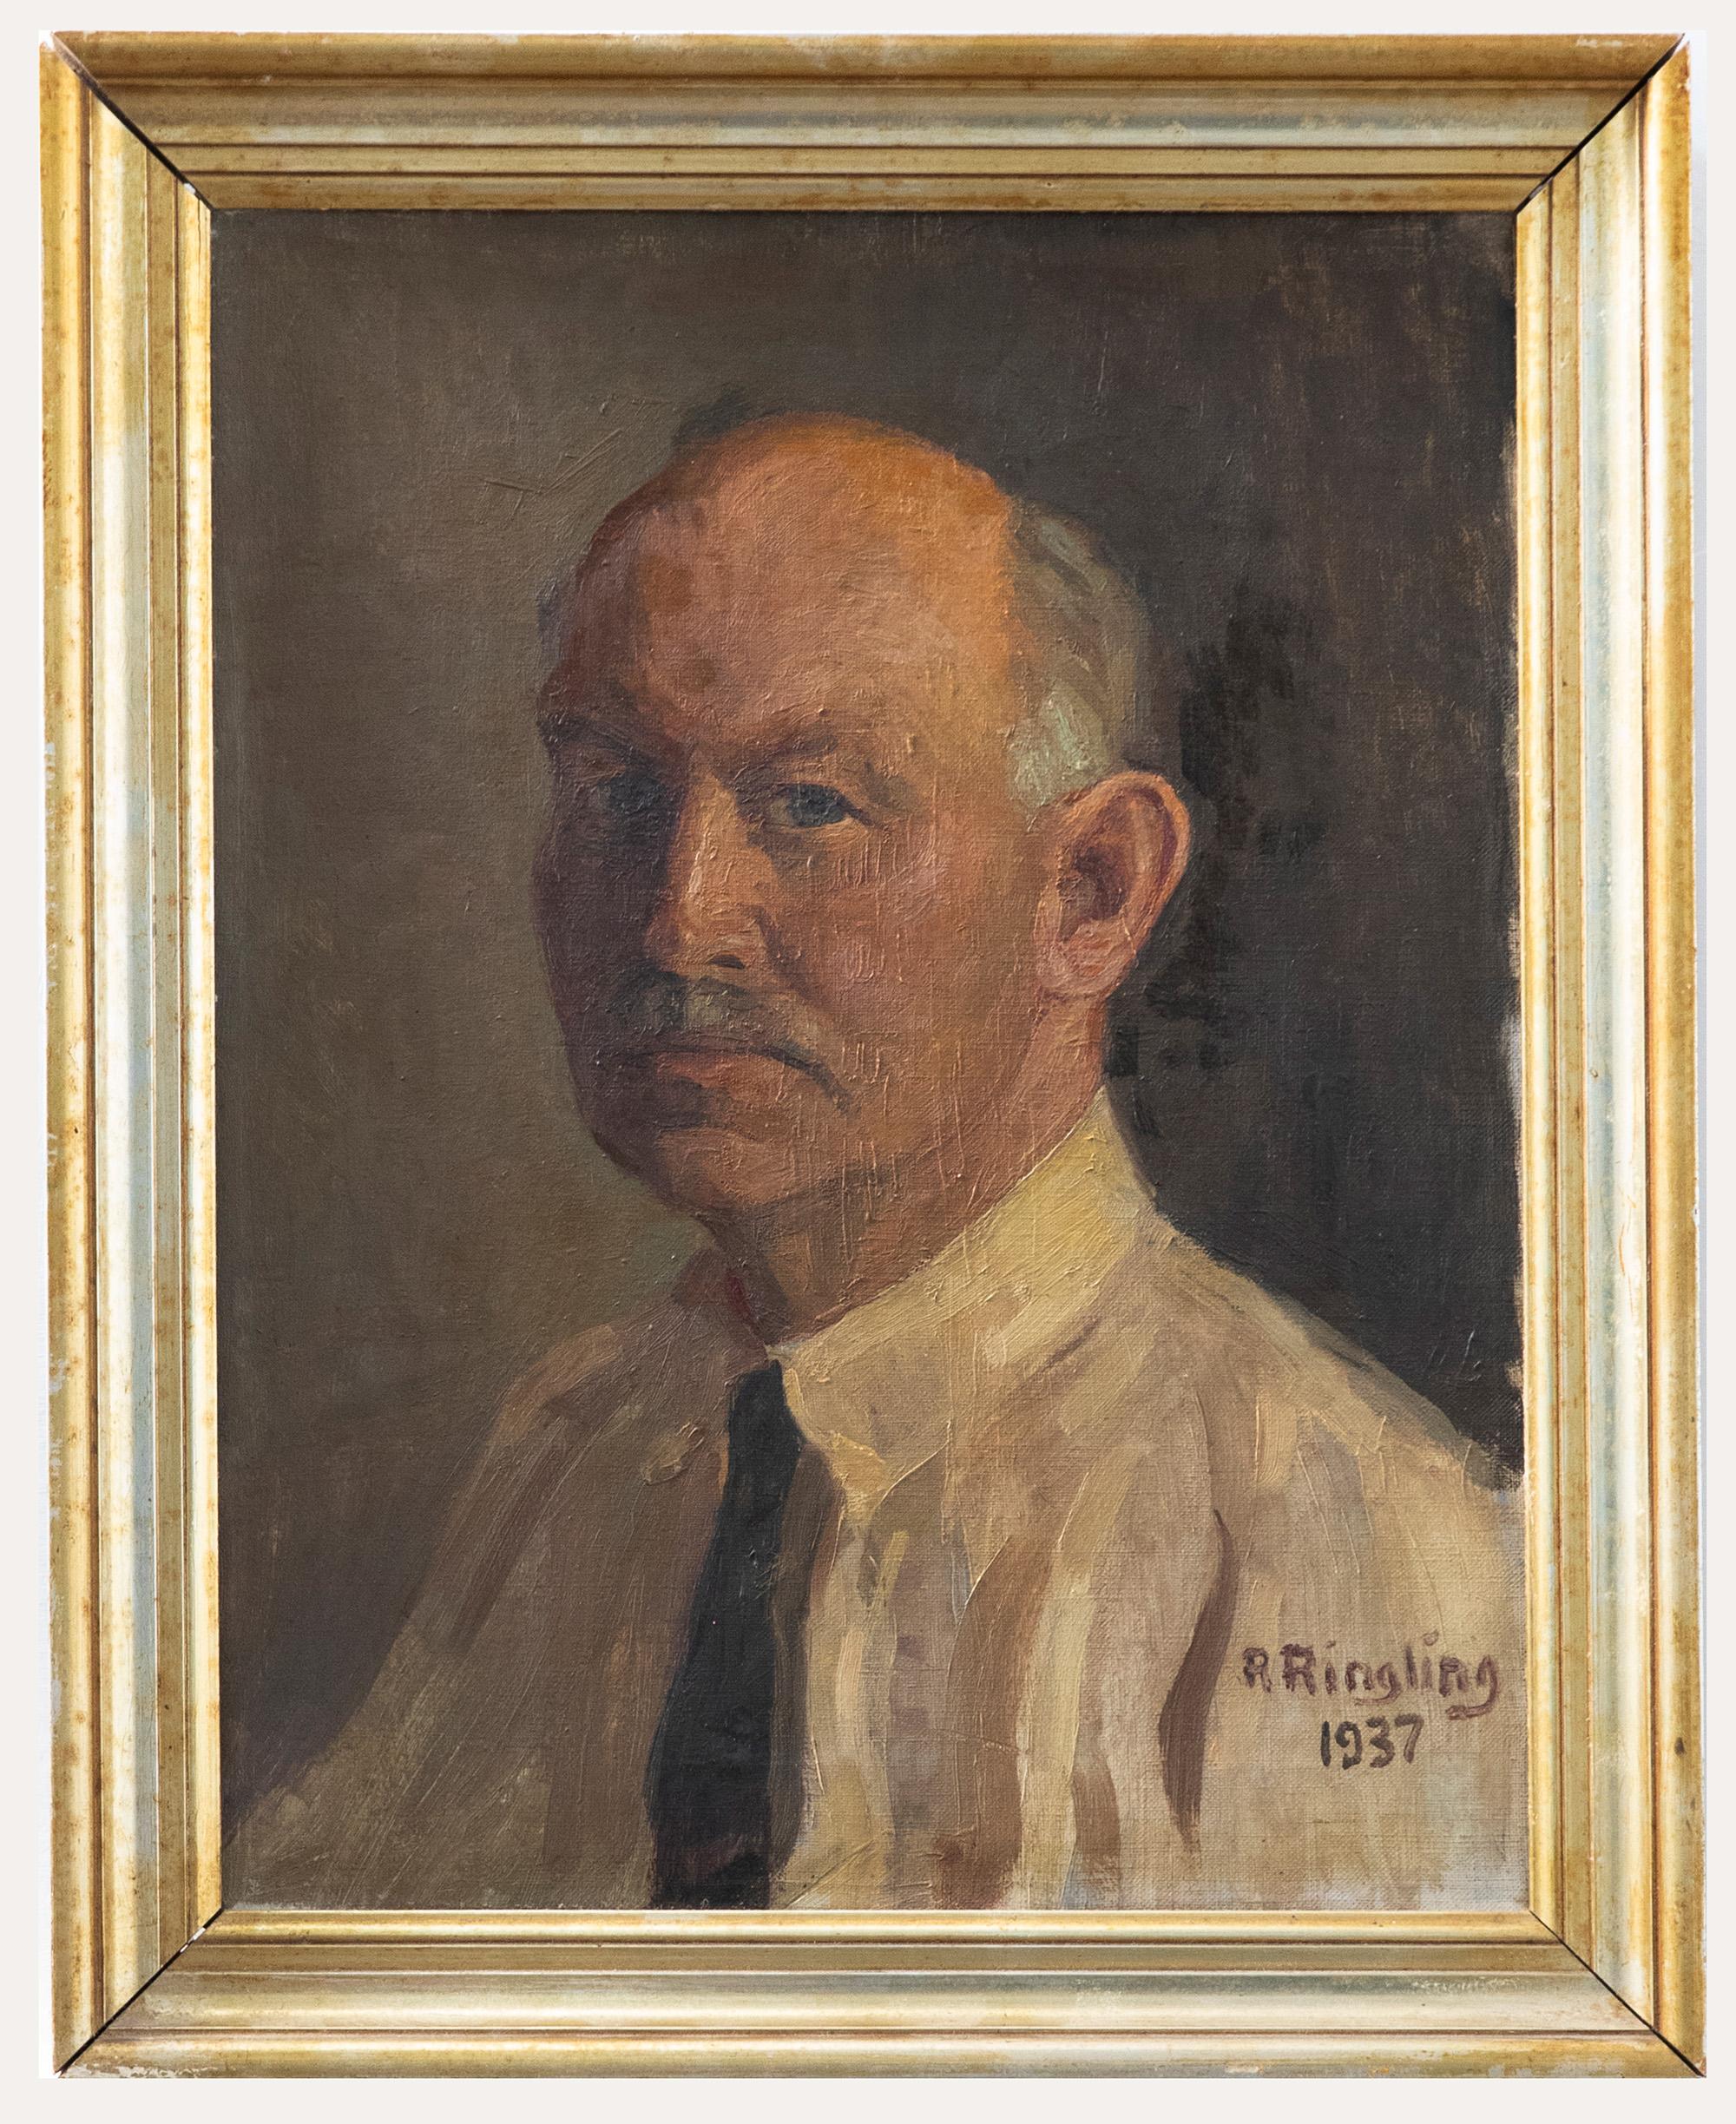 Unknown Portrait Painting - R. Ringling - 1937 Oil, Portrait of a Gentleman (Ringling Brothers)